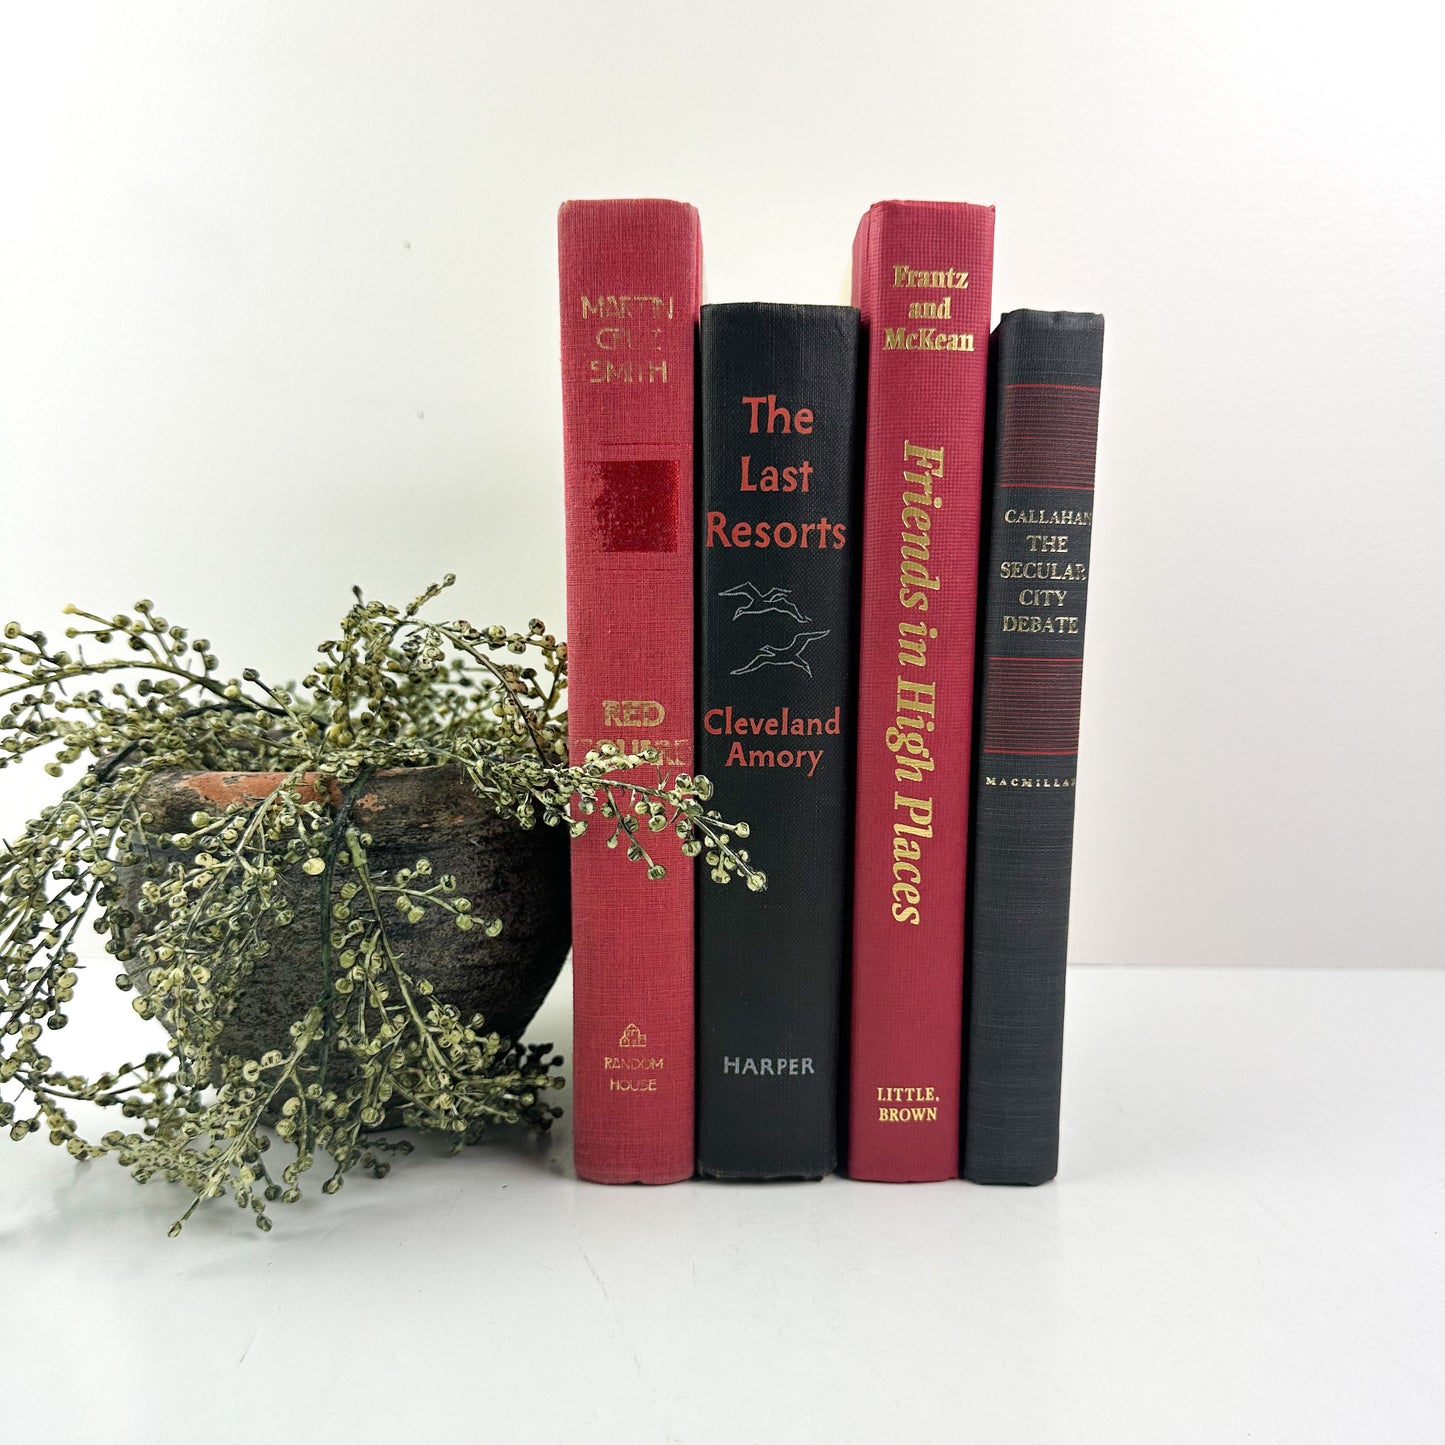 Red and Black Decorative Book Set